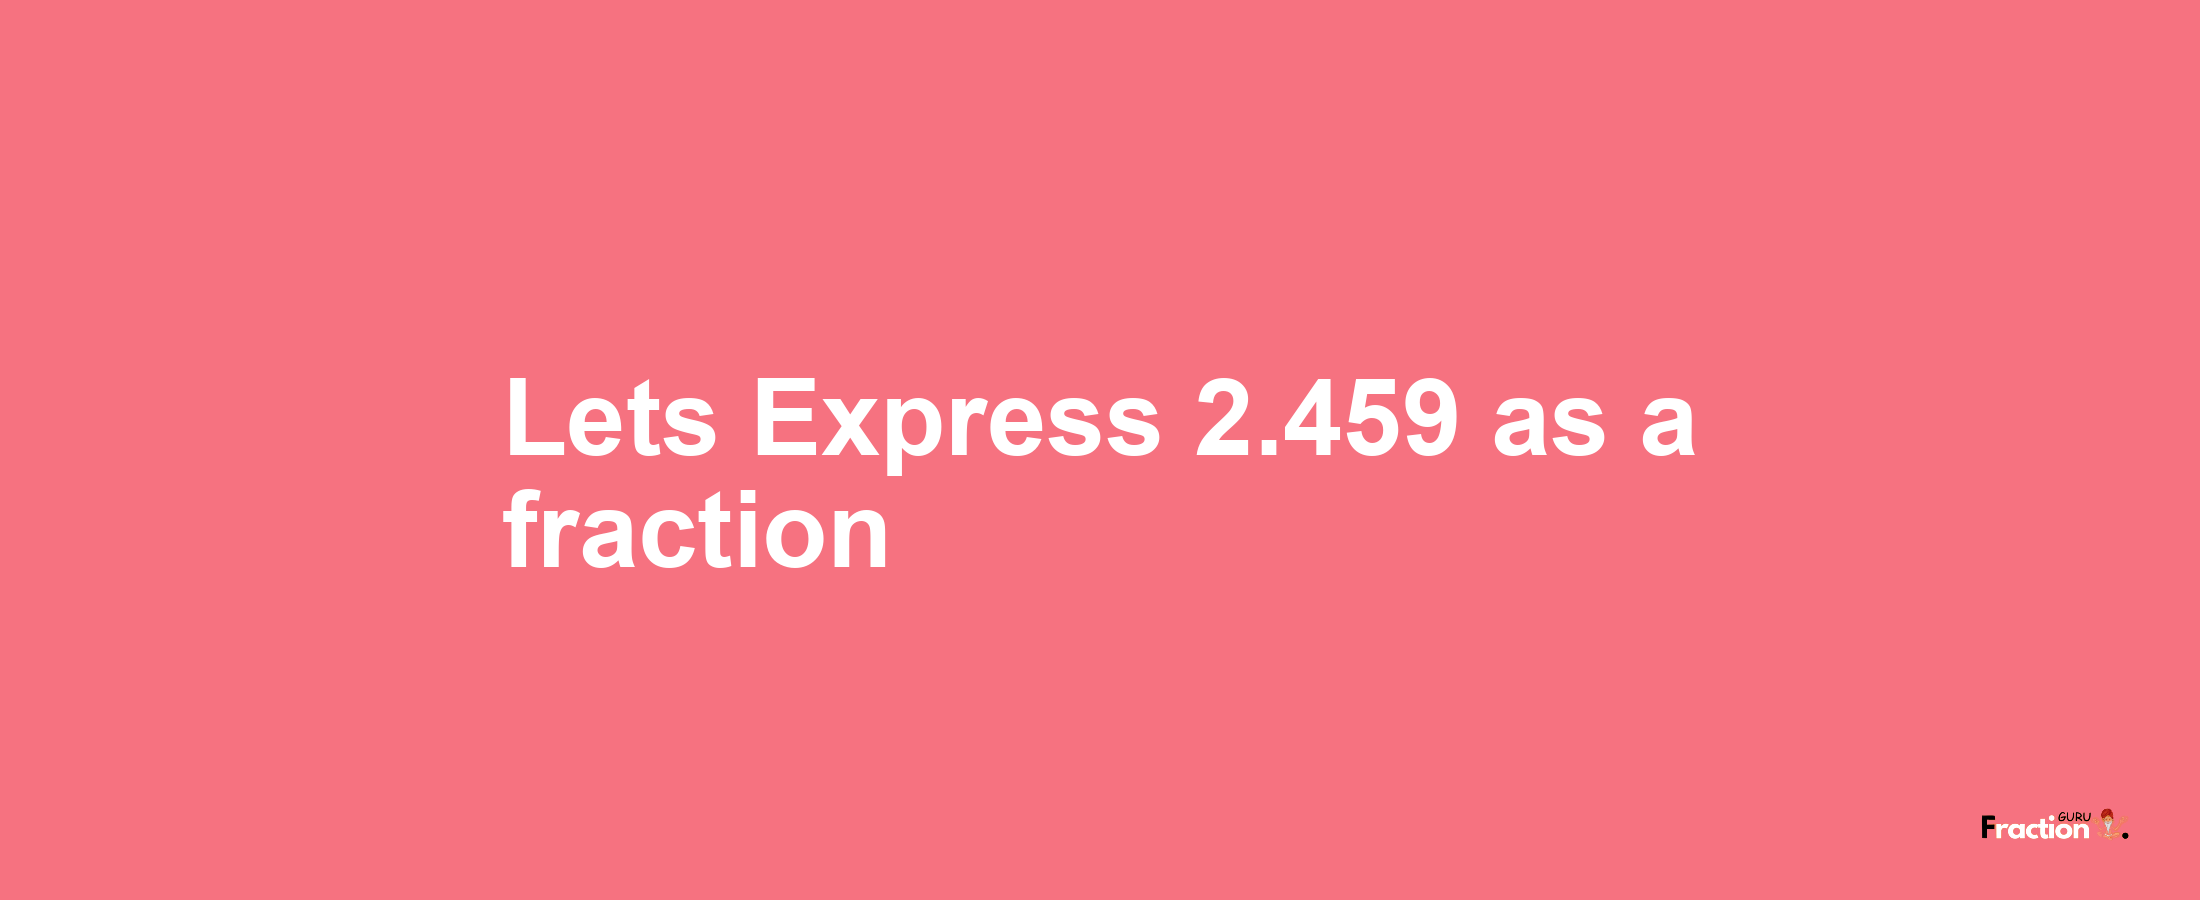 Lets Express 2.459 as afraction